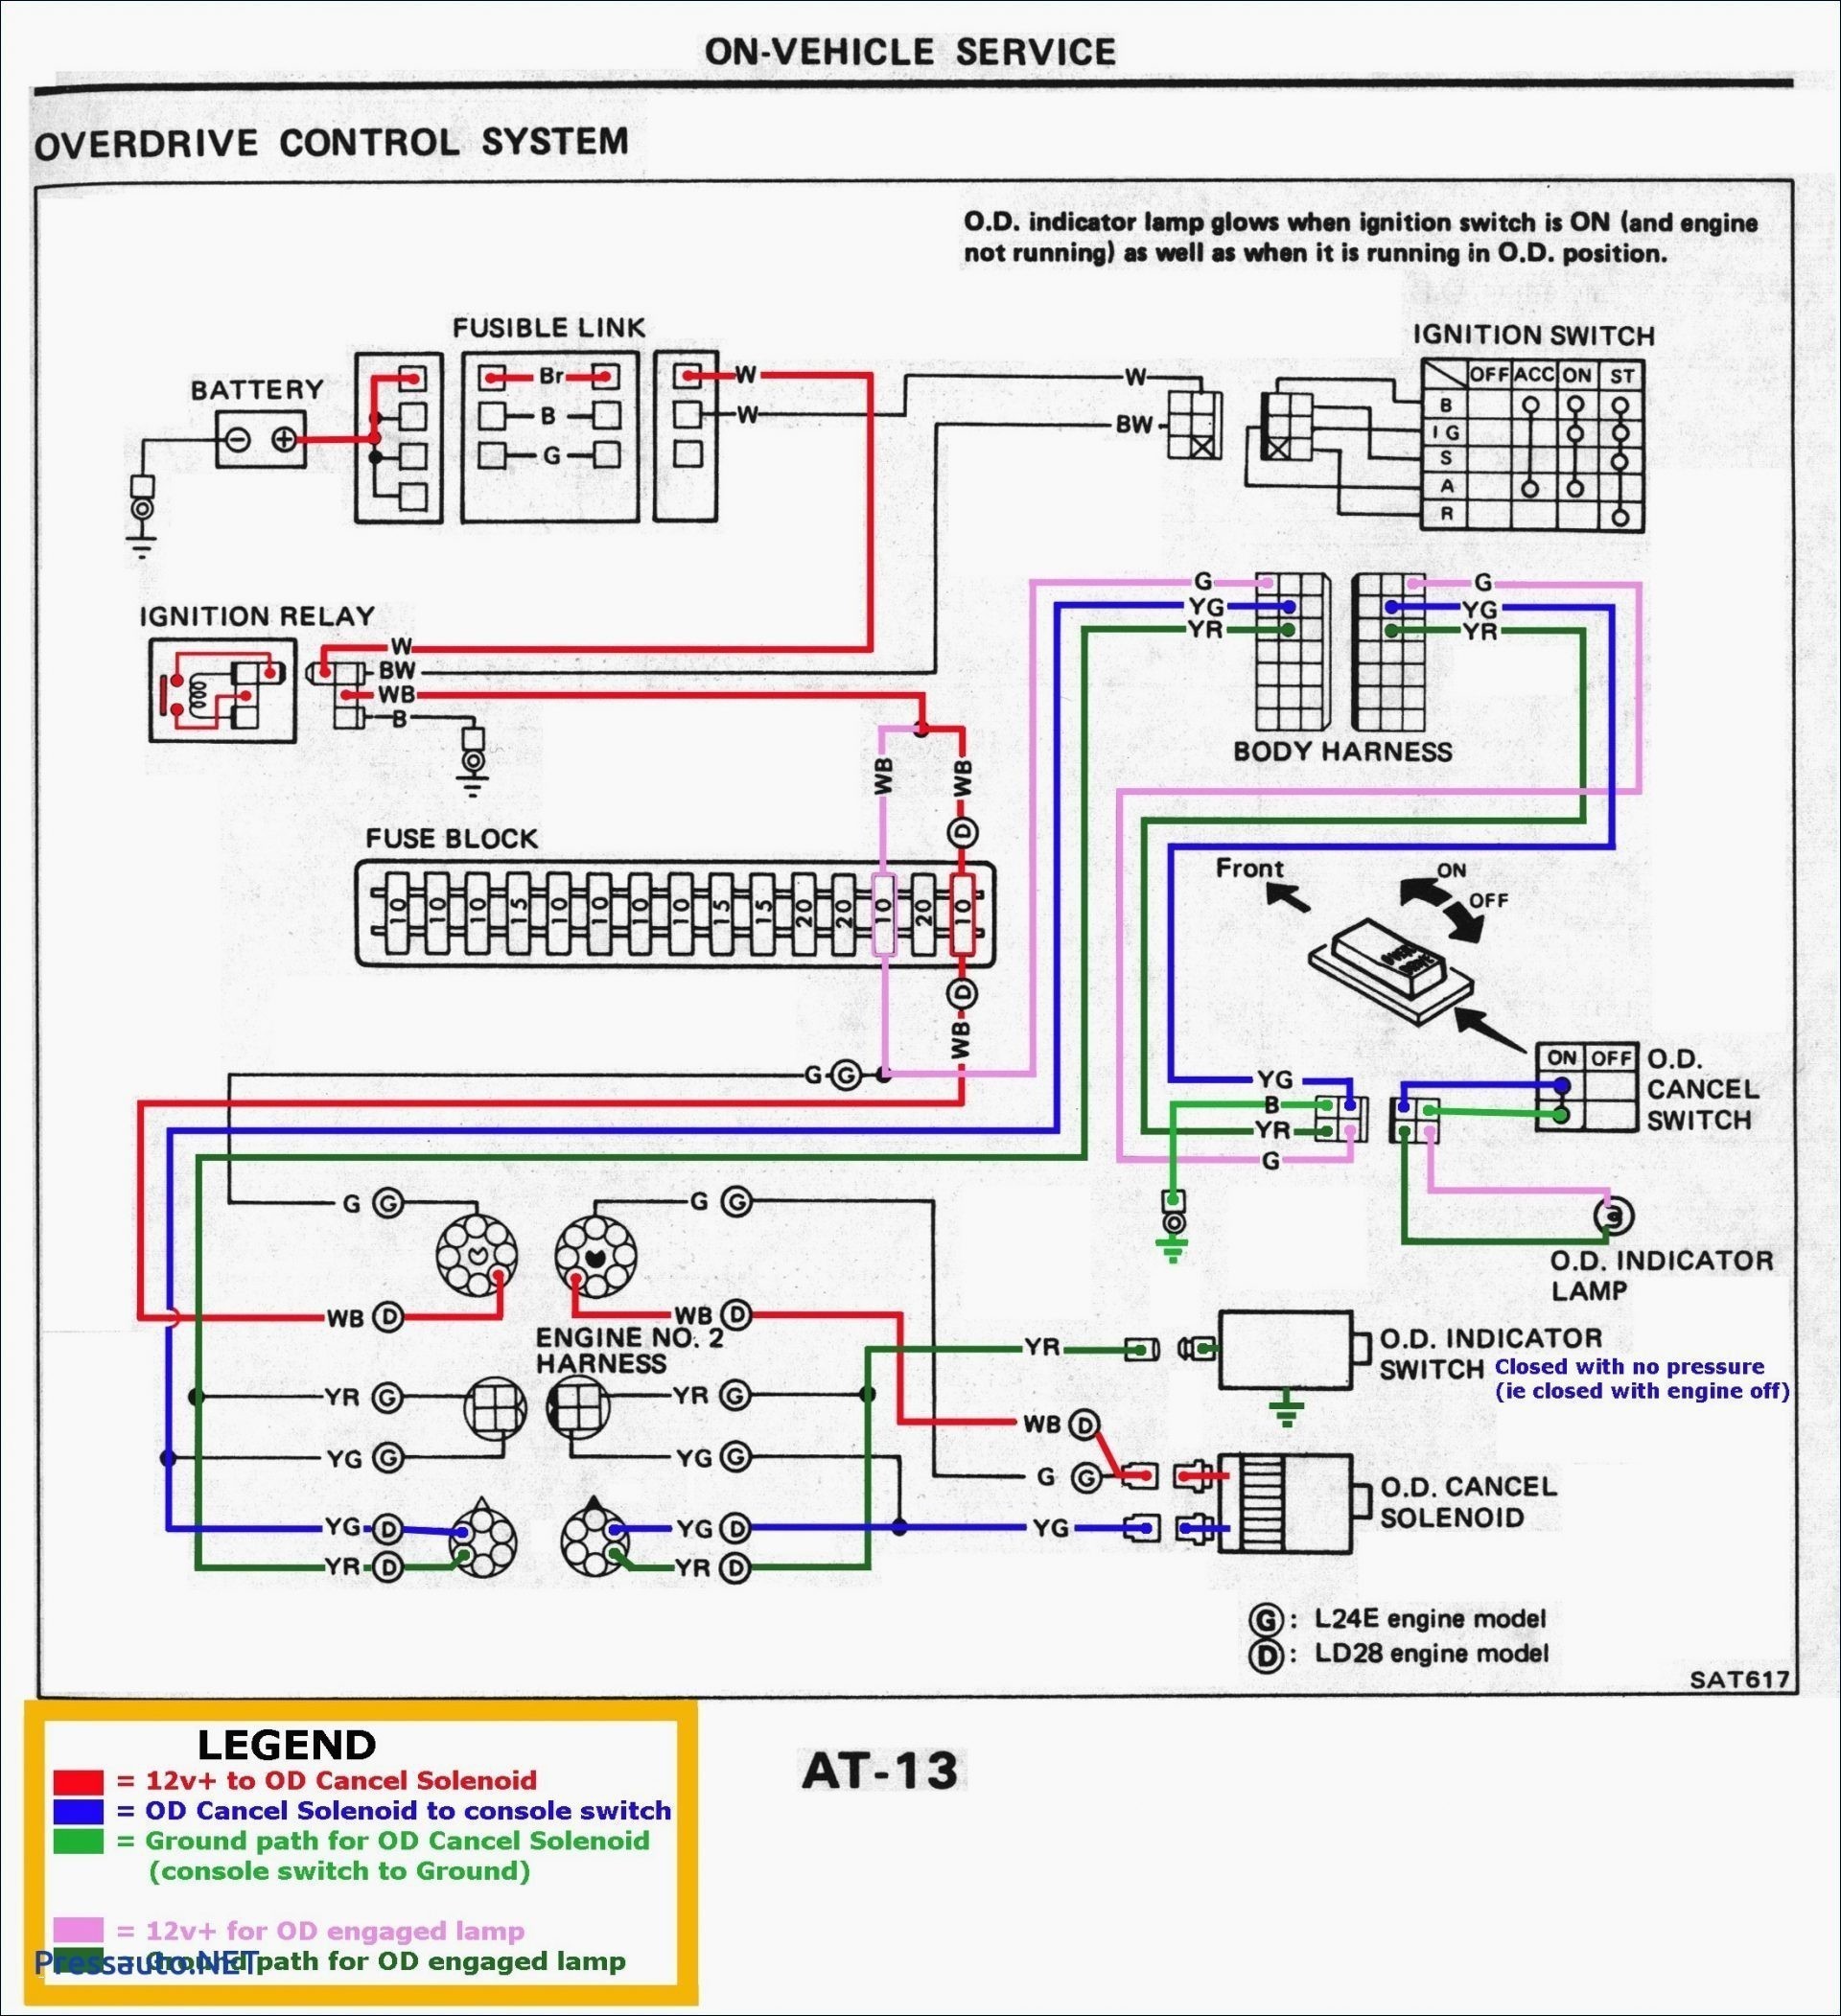 Electric Wiring Diagrams Book Electrical Wiring Diagram For New House New Wiring Diagrams House